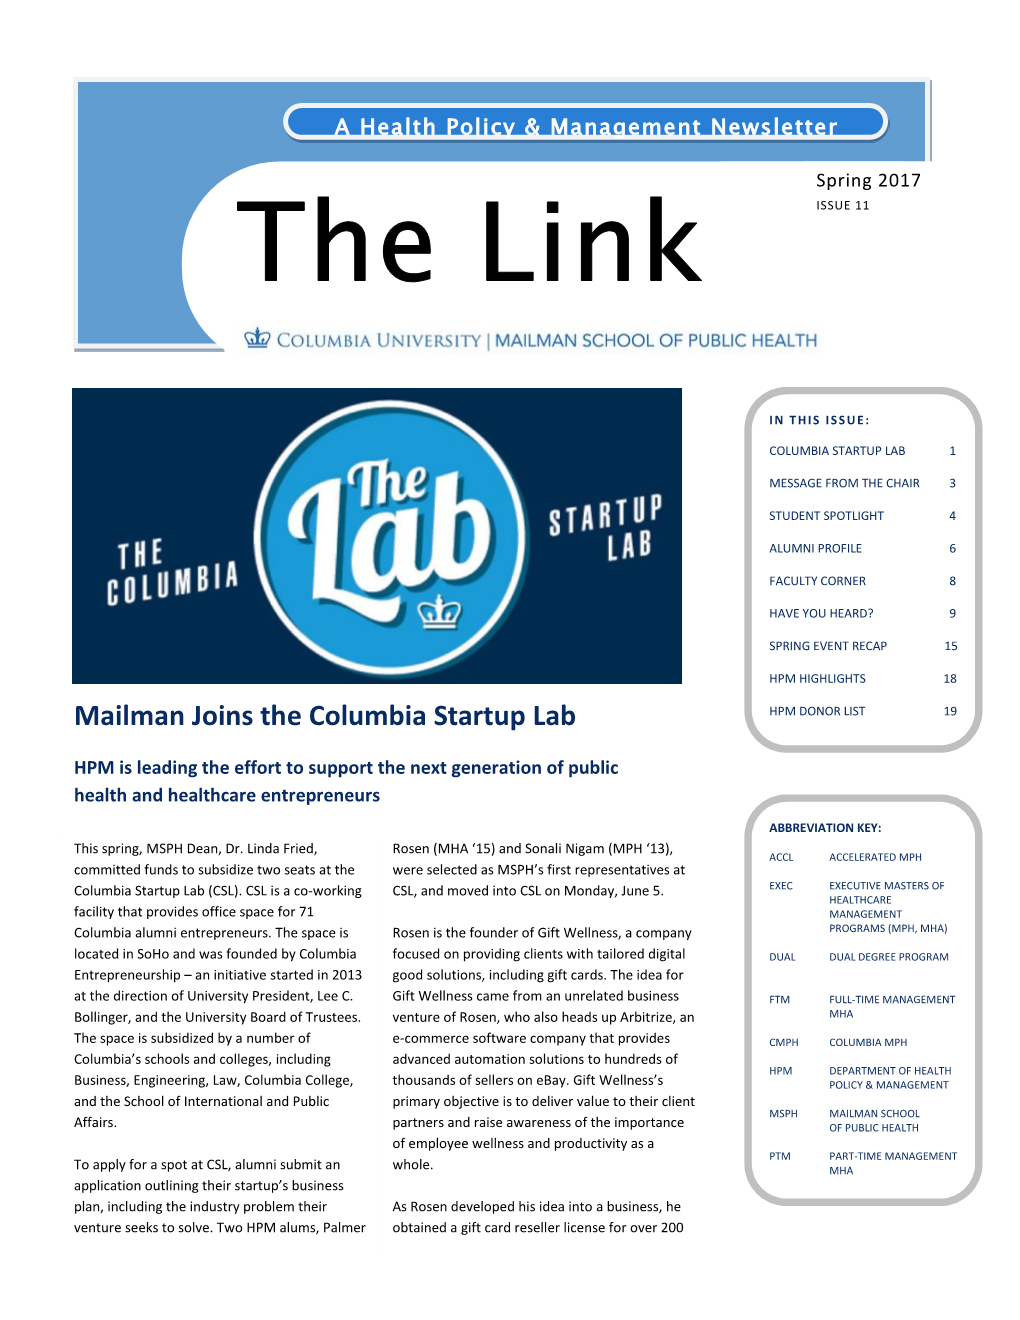 The Link Spring 2017